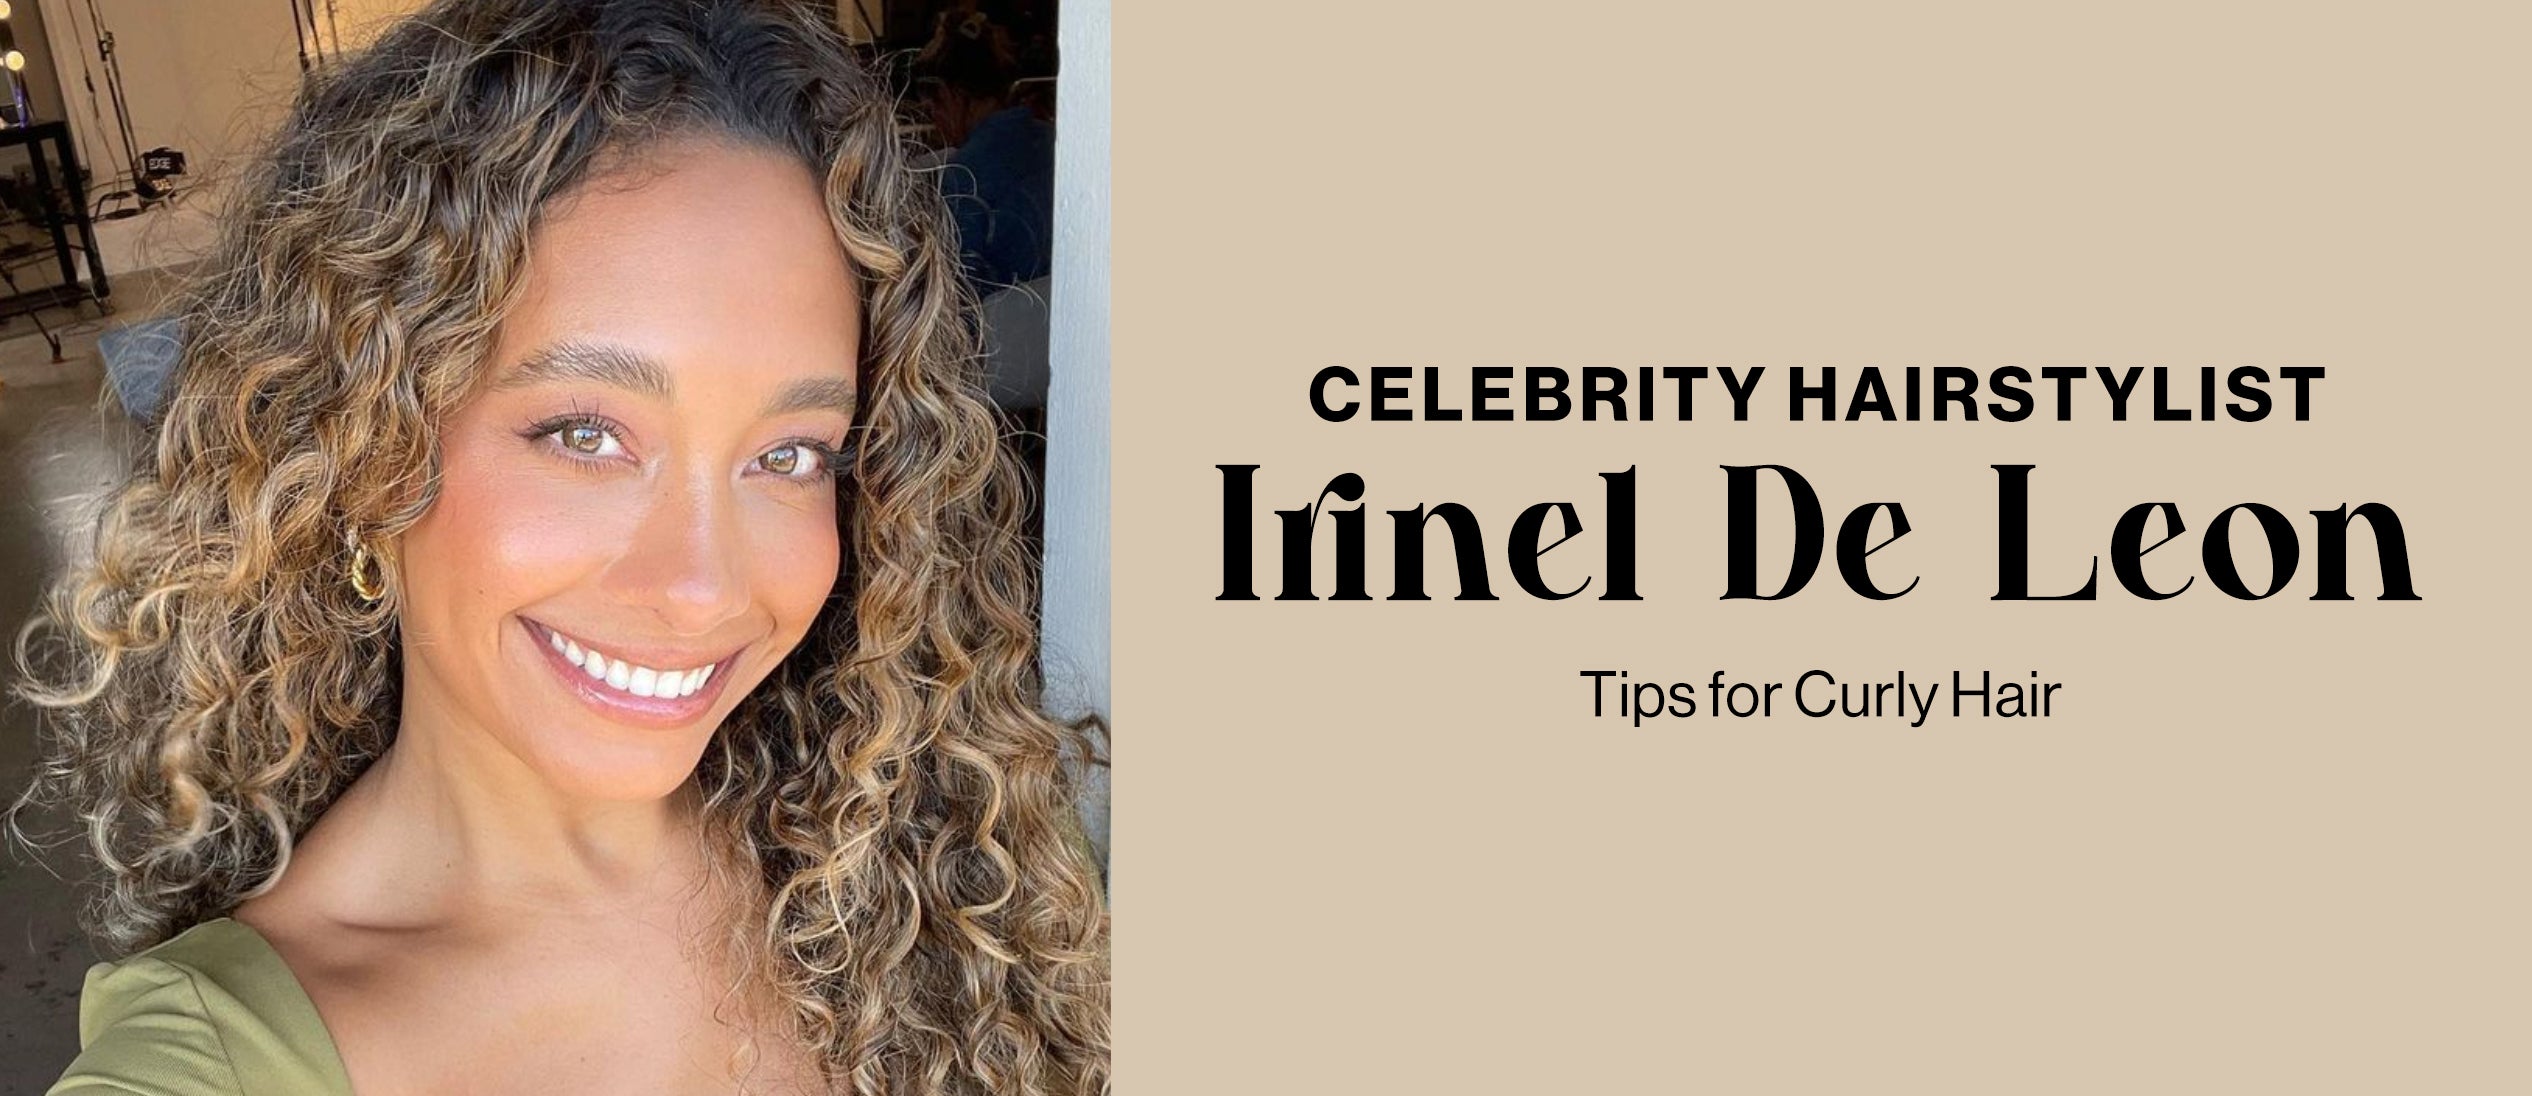 Professional Hairstylist Irinel De Leon Tips for Curly Hair